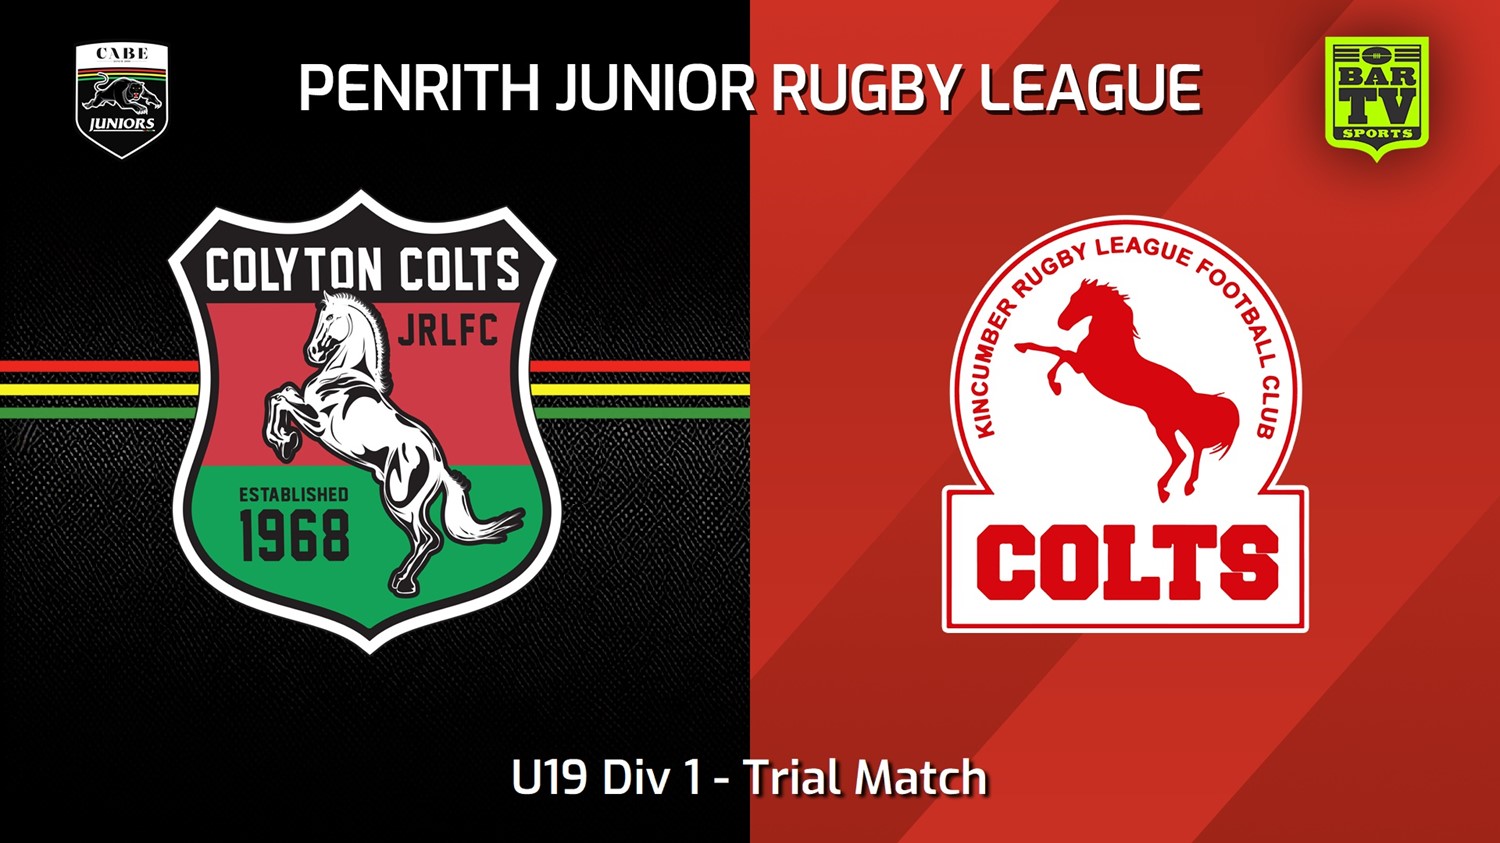 240323-Penrith & District Junior Rugby League Trial Match - U19 Div 1 - Colyton Colts v Kincumber Colts Slate Image